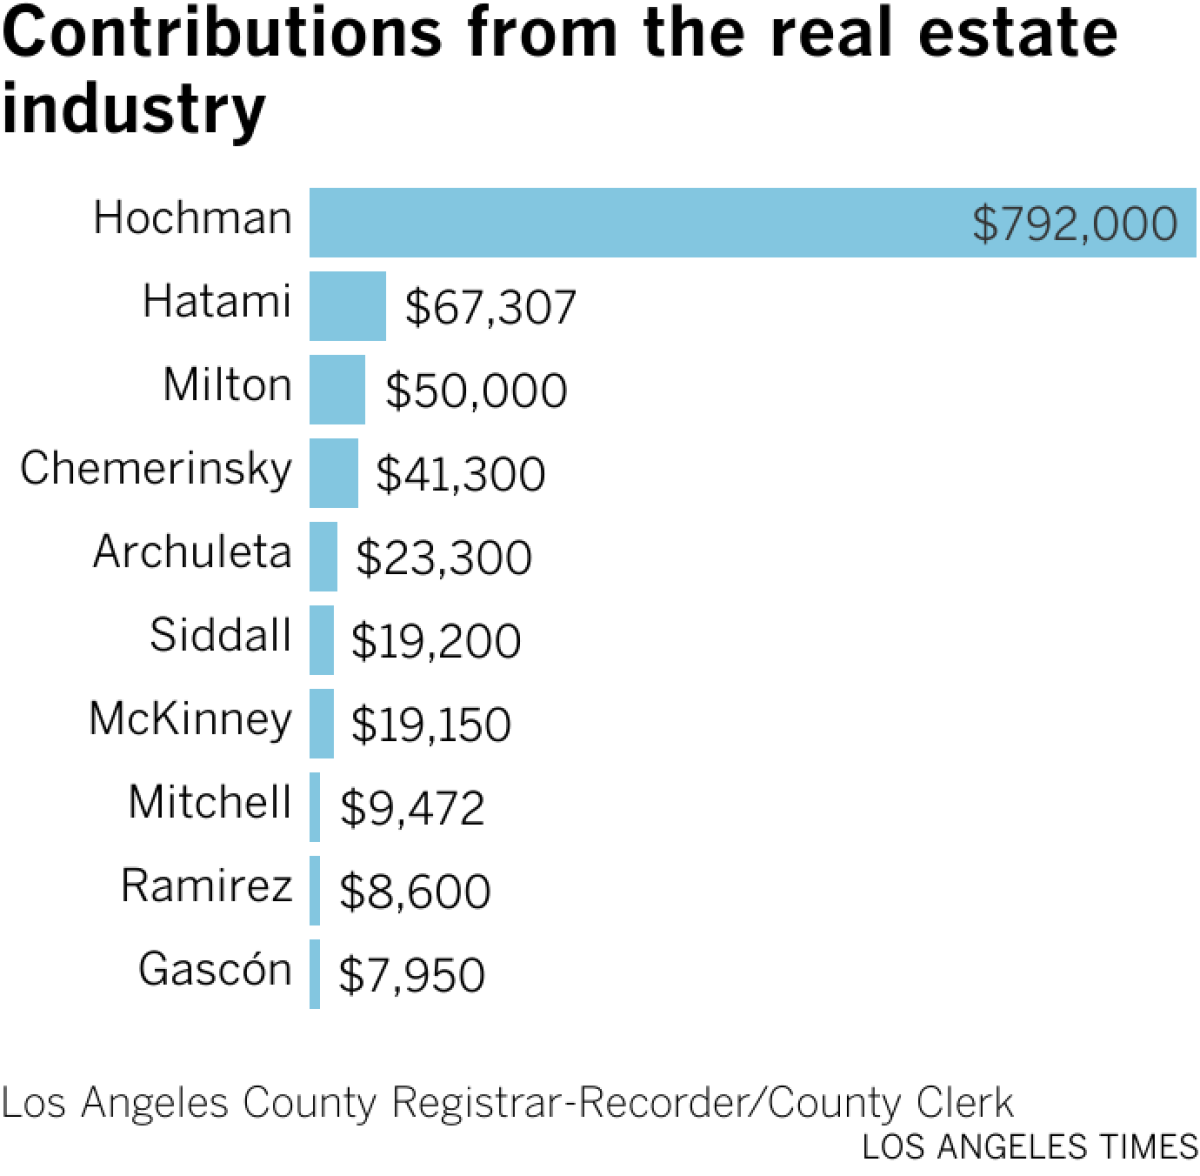 Bar chart showing Hochman has the most contributions from the real estate industry